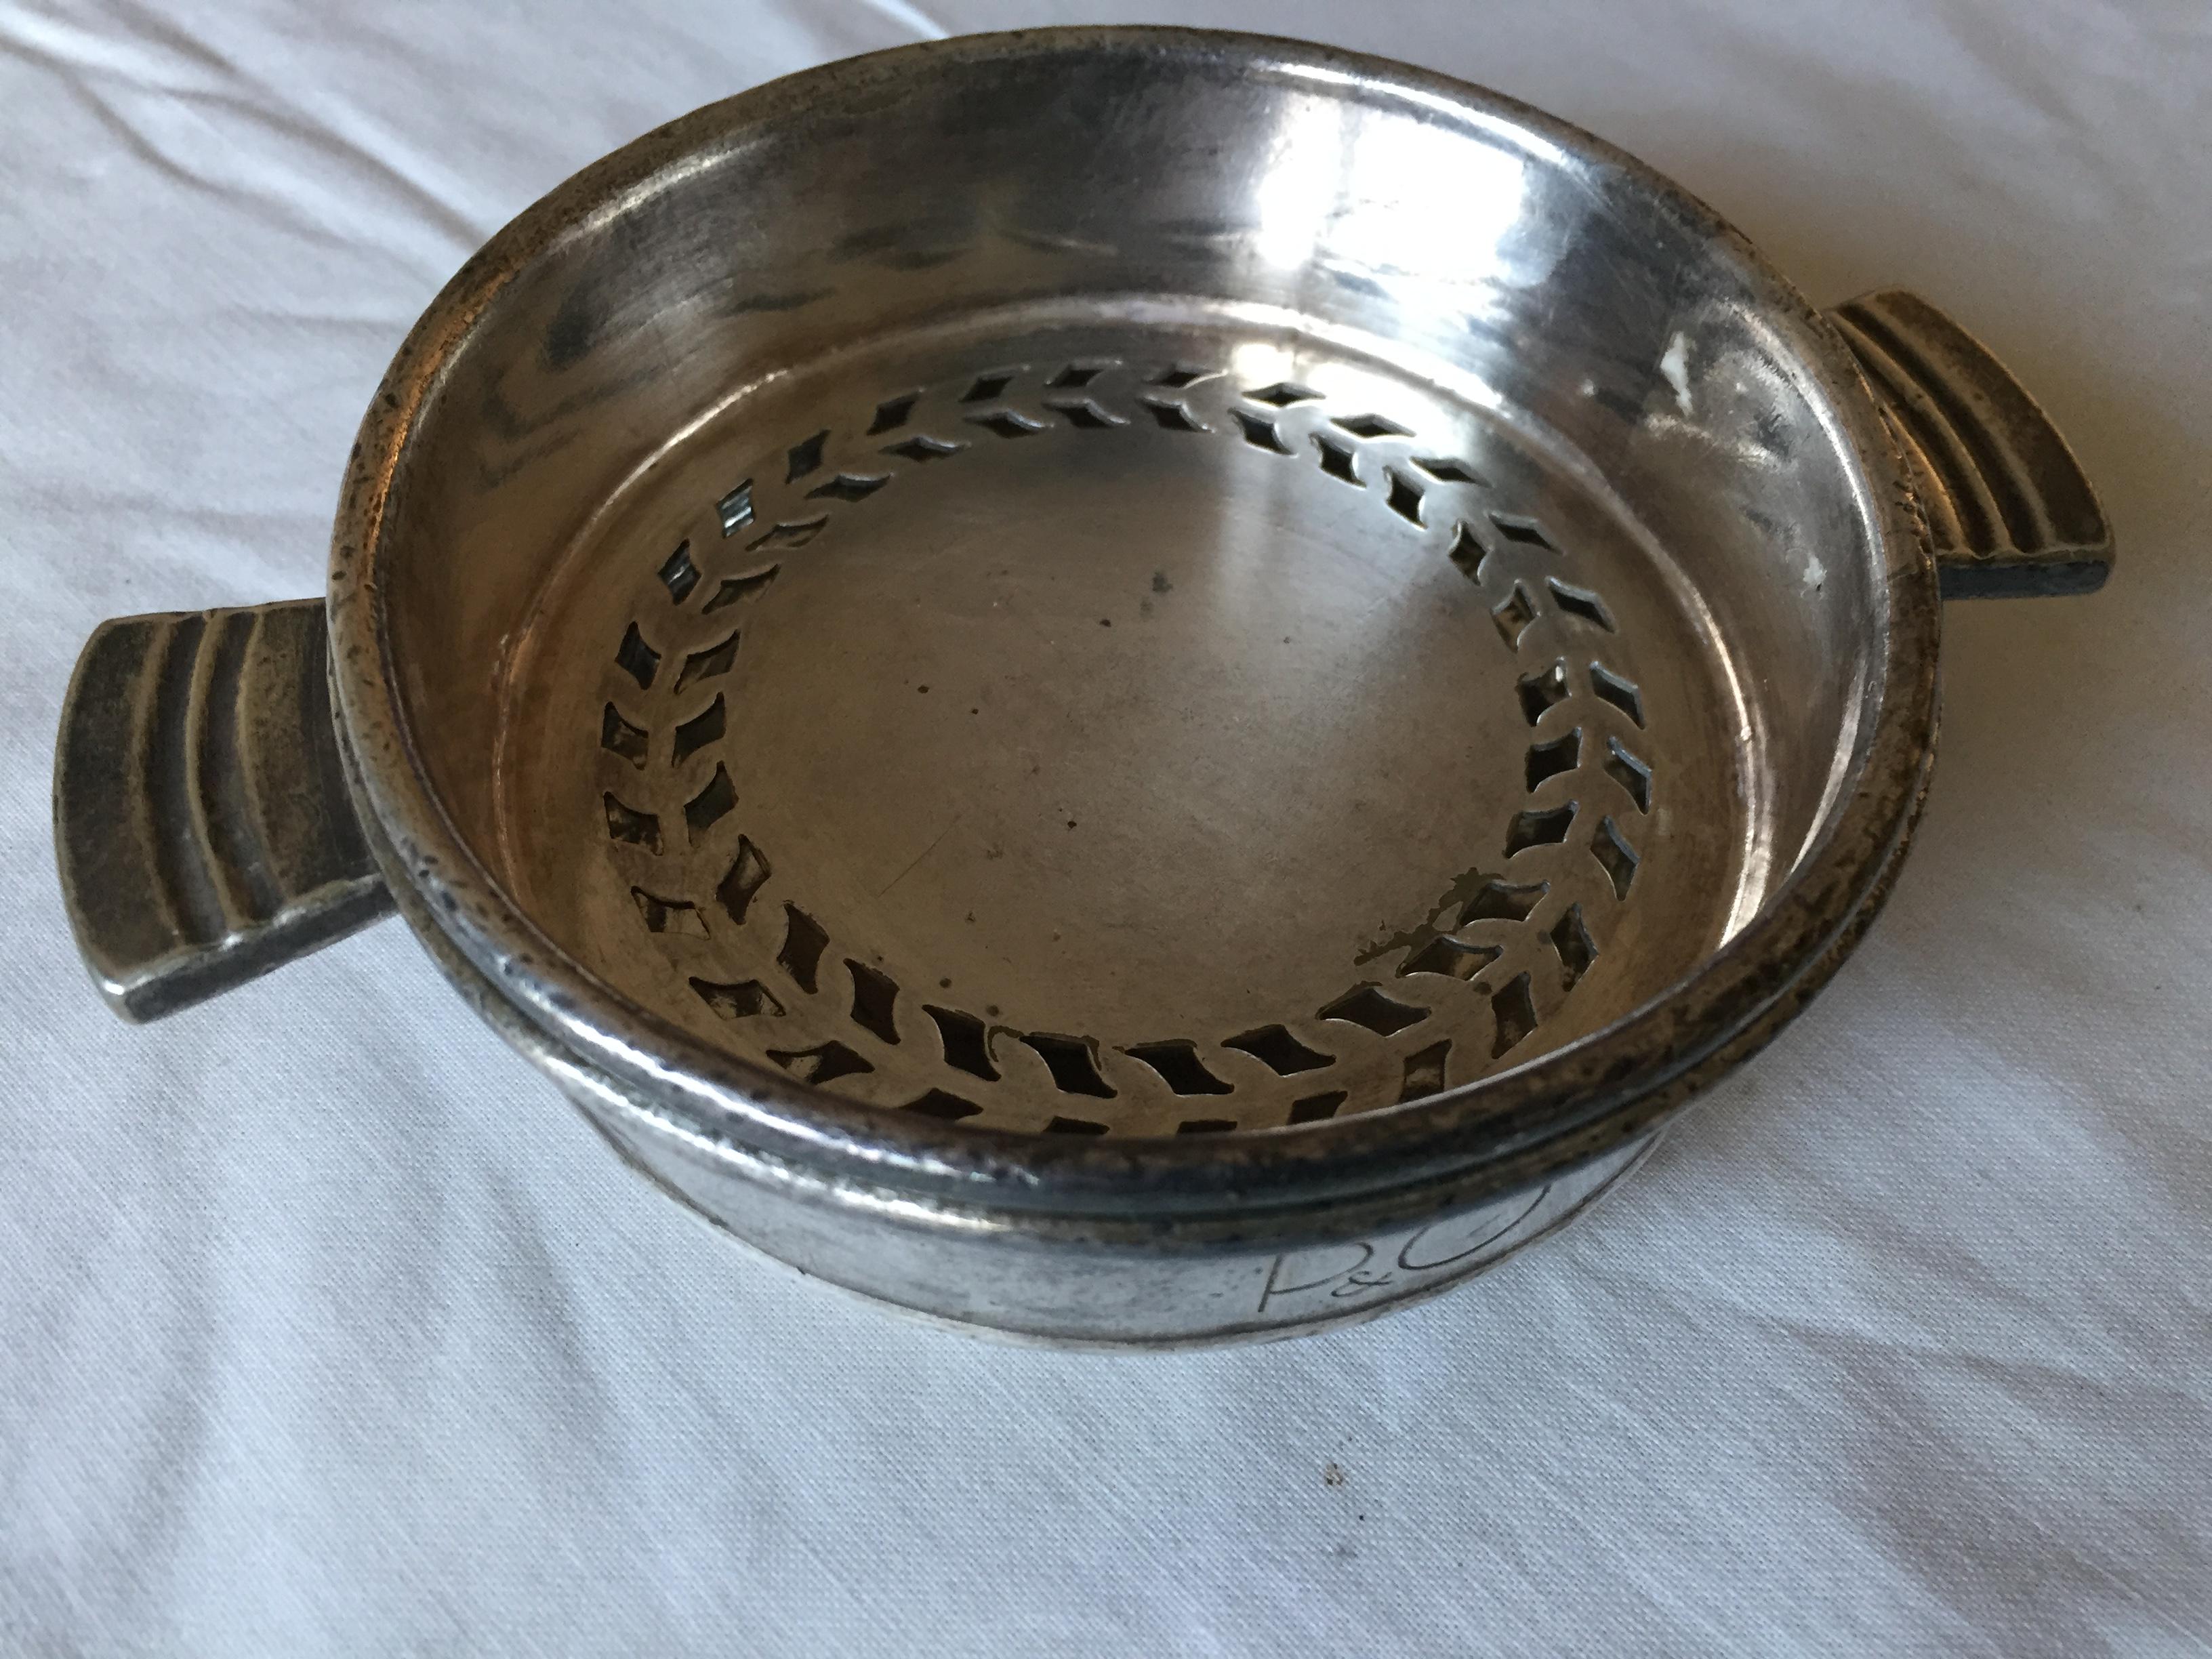 AS USED IN SERVICE TWO PART VEGETABLE SERVING DISH FROM THE P&O LINE